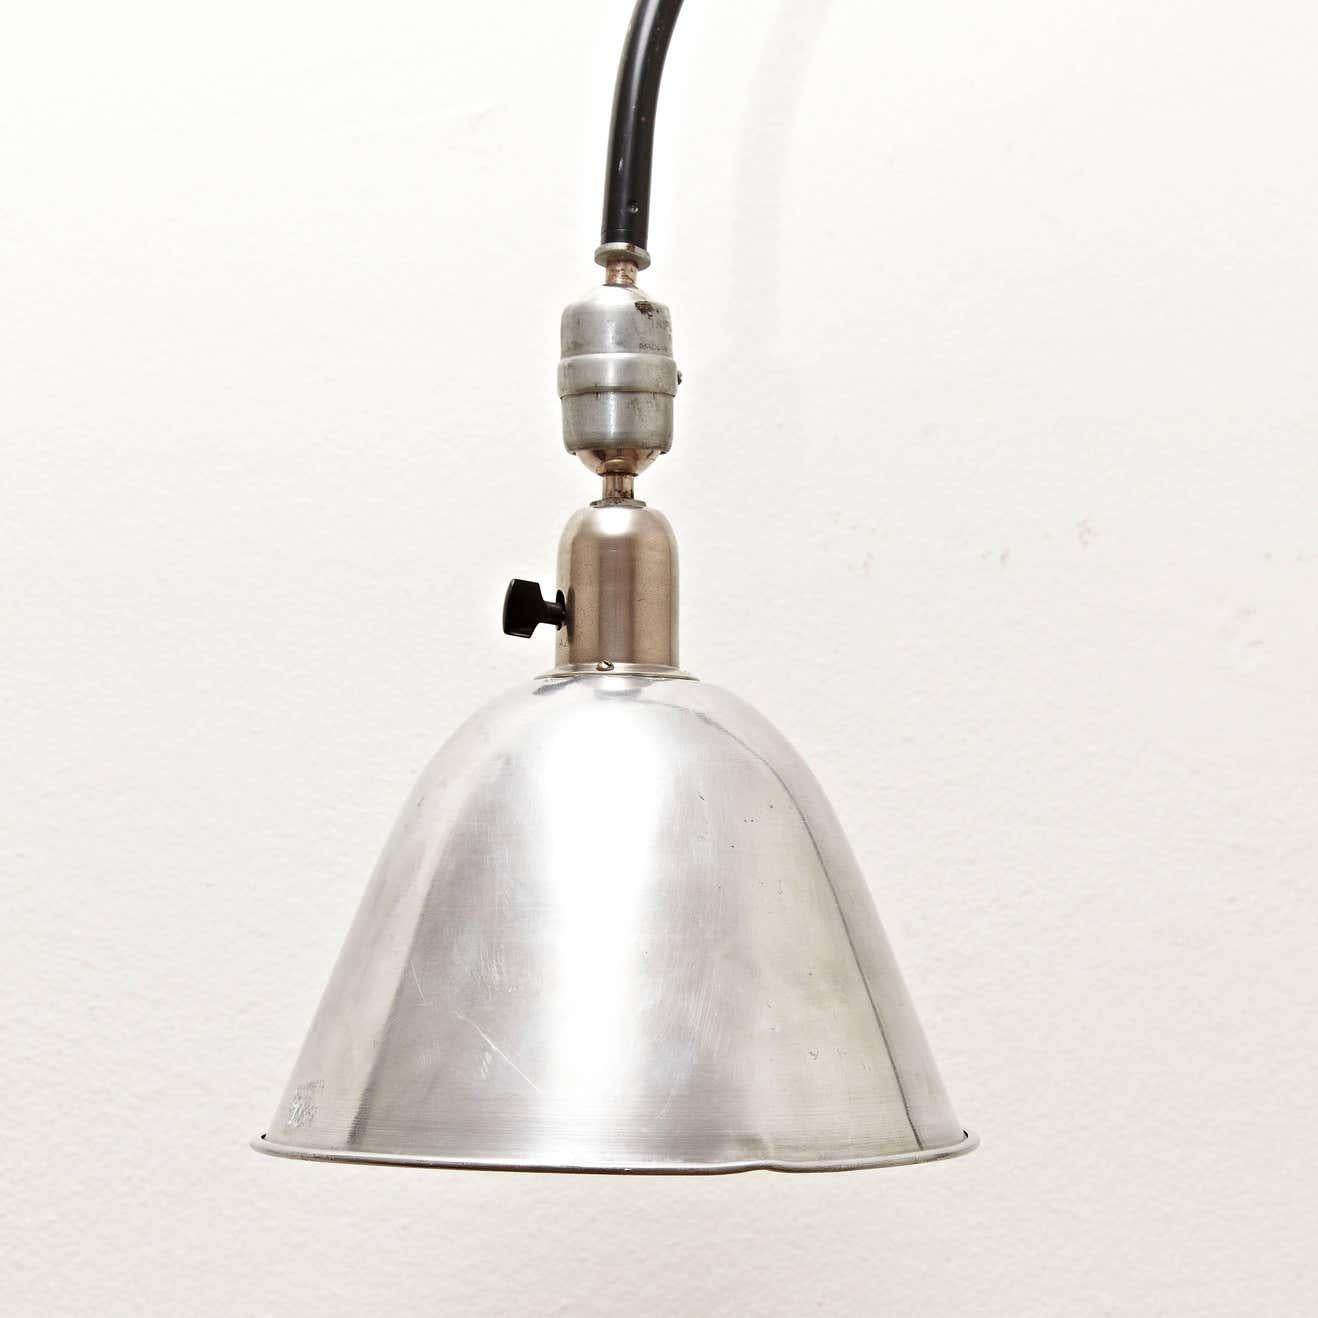 Wall lamp designed by Johan Petter Johansson.
Manufactured by Triplex (Sweden), circa 1930.
Aluminium and steel.

In good original condition with minor wear consistent with age and use, preserving a beautiful patina.